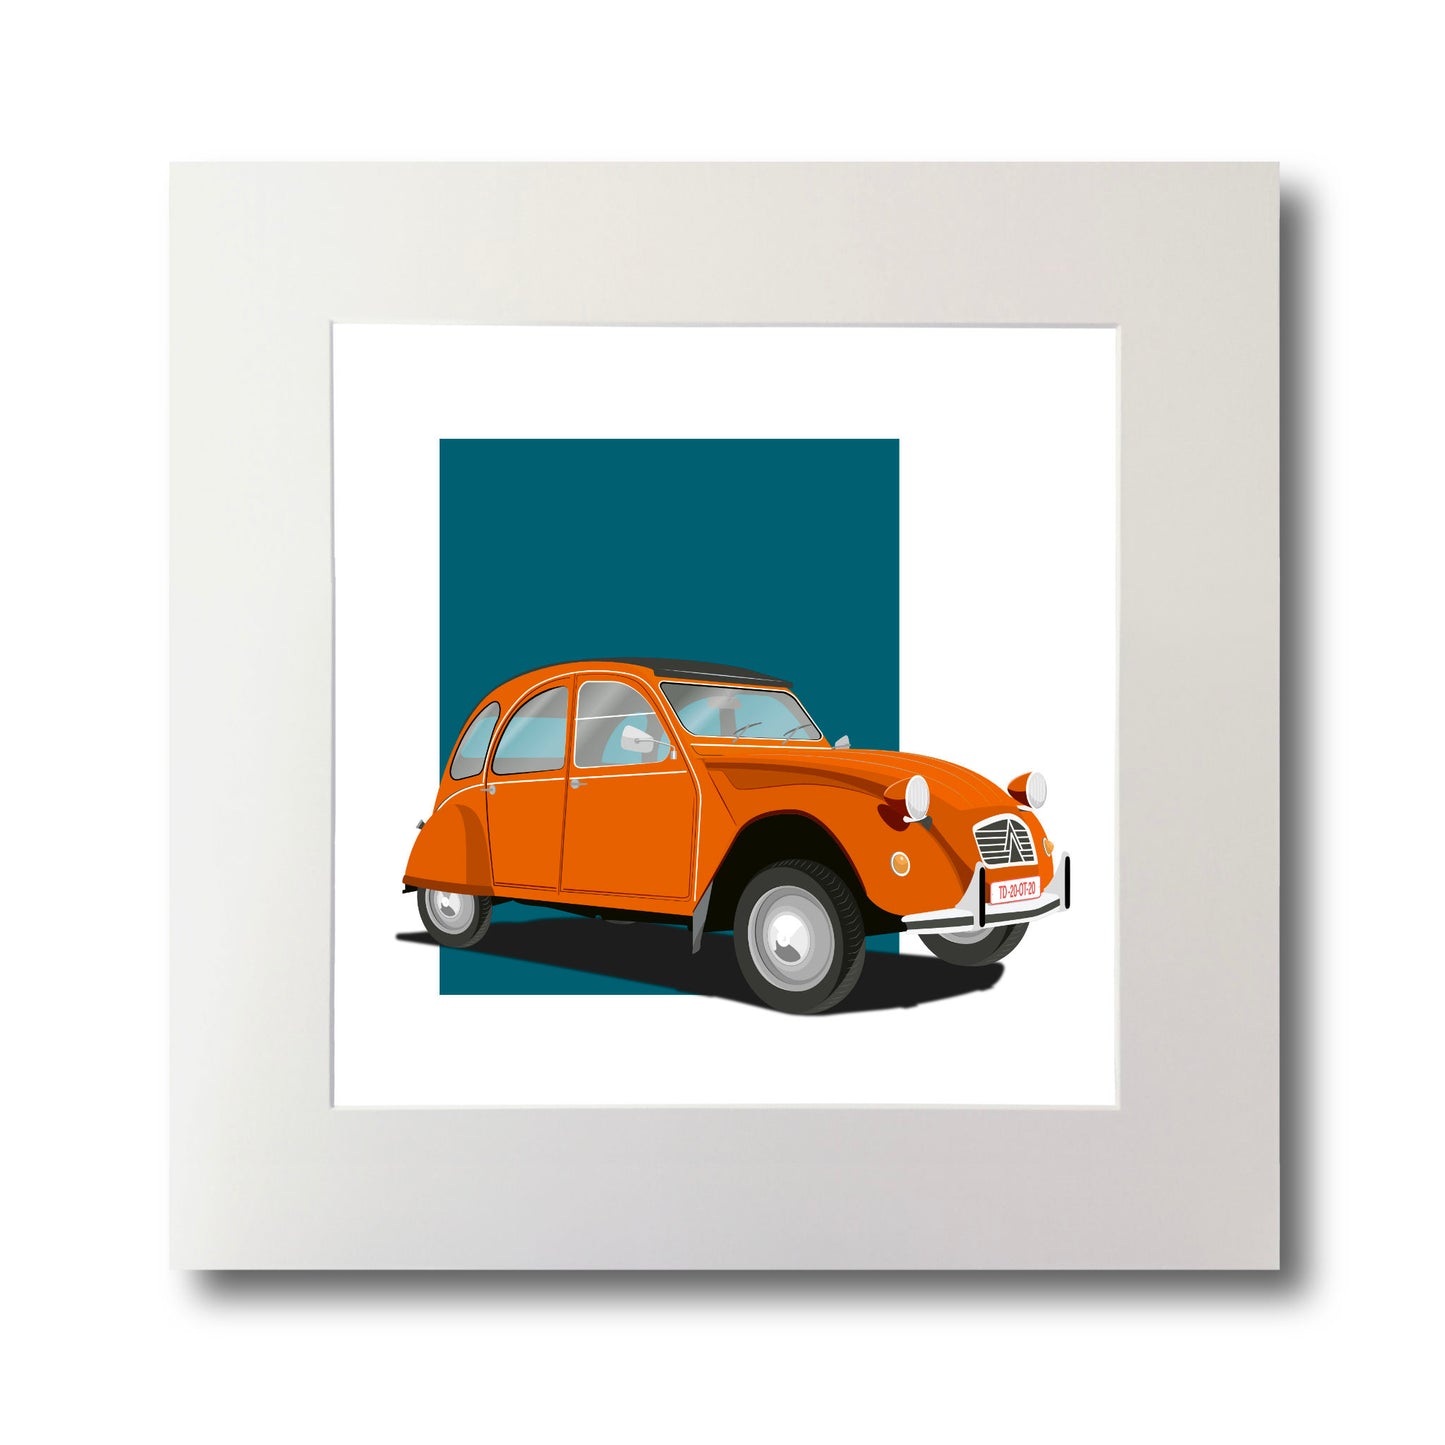 Illustration of an orange Citroën 2CV, mounted and measuring 30 by 30 cm